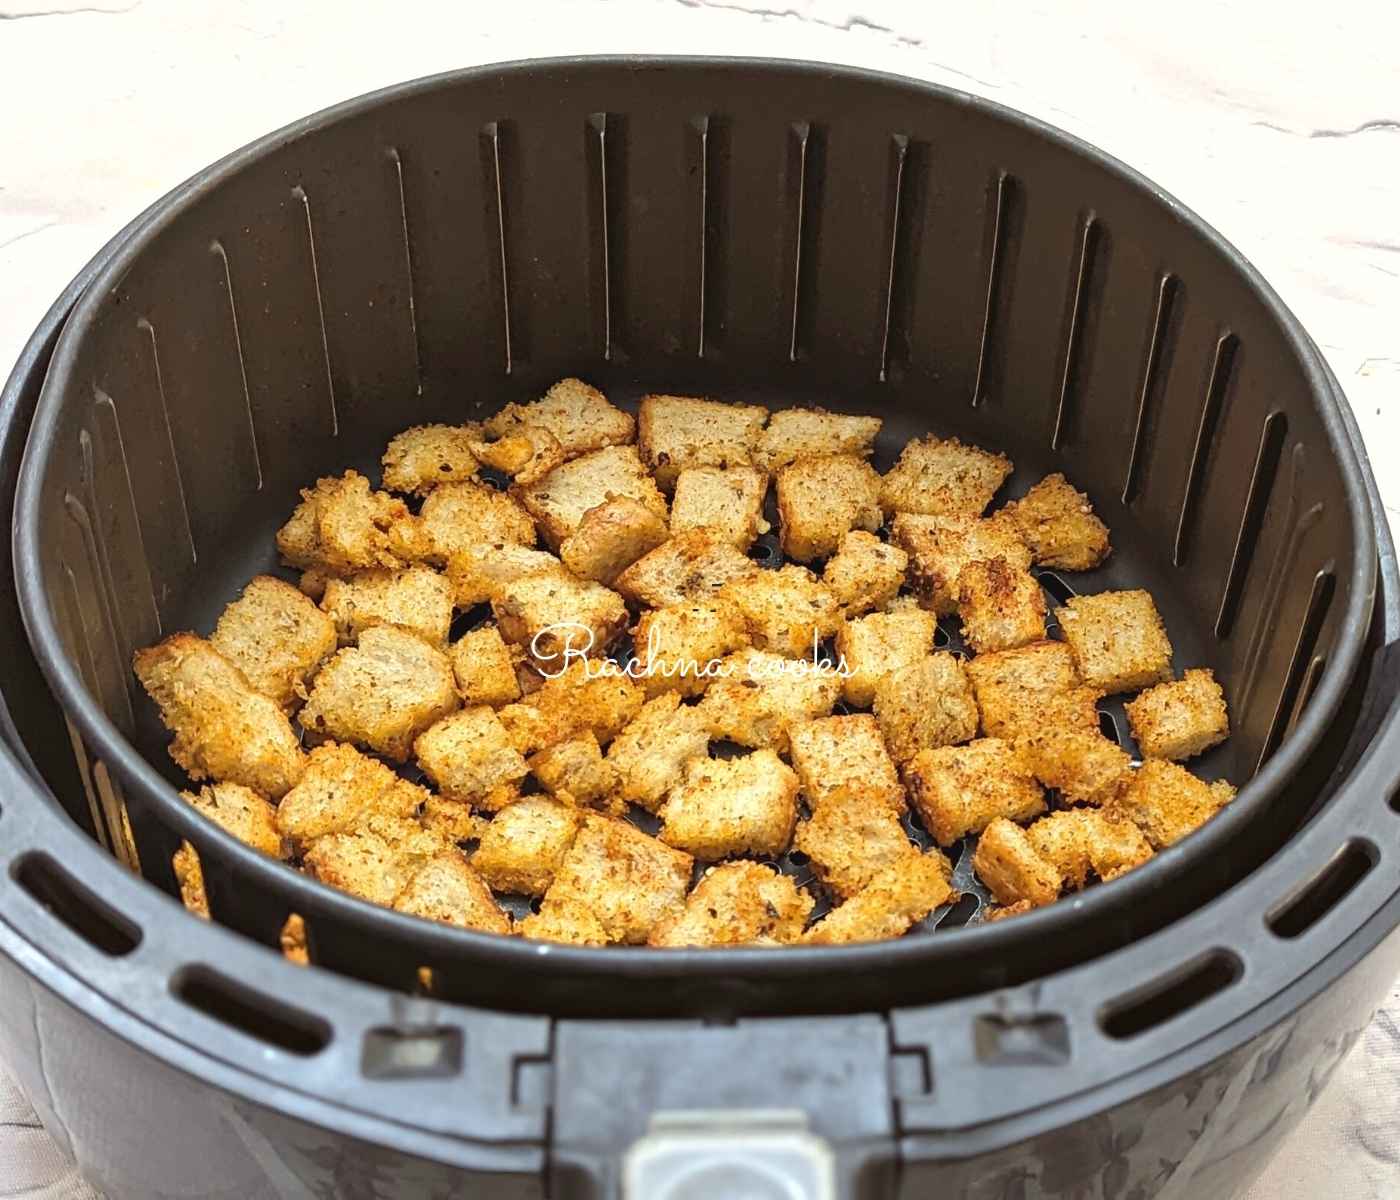 seasoned bread cubes laid out in air fryer basket ready for air frying.